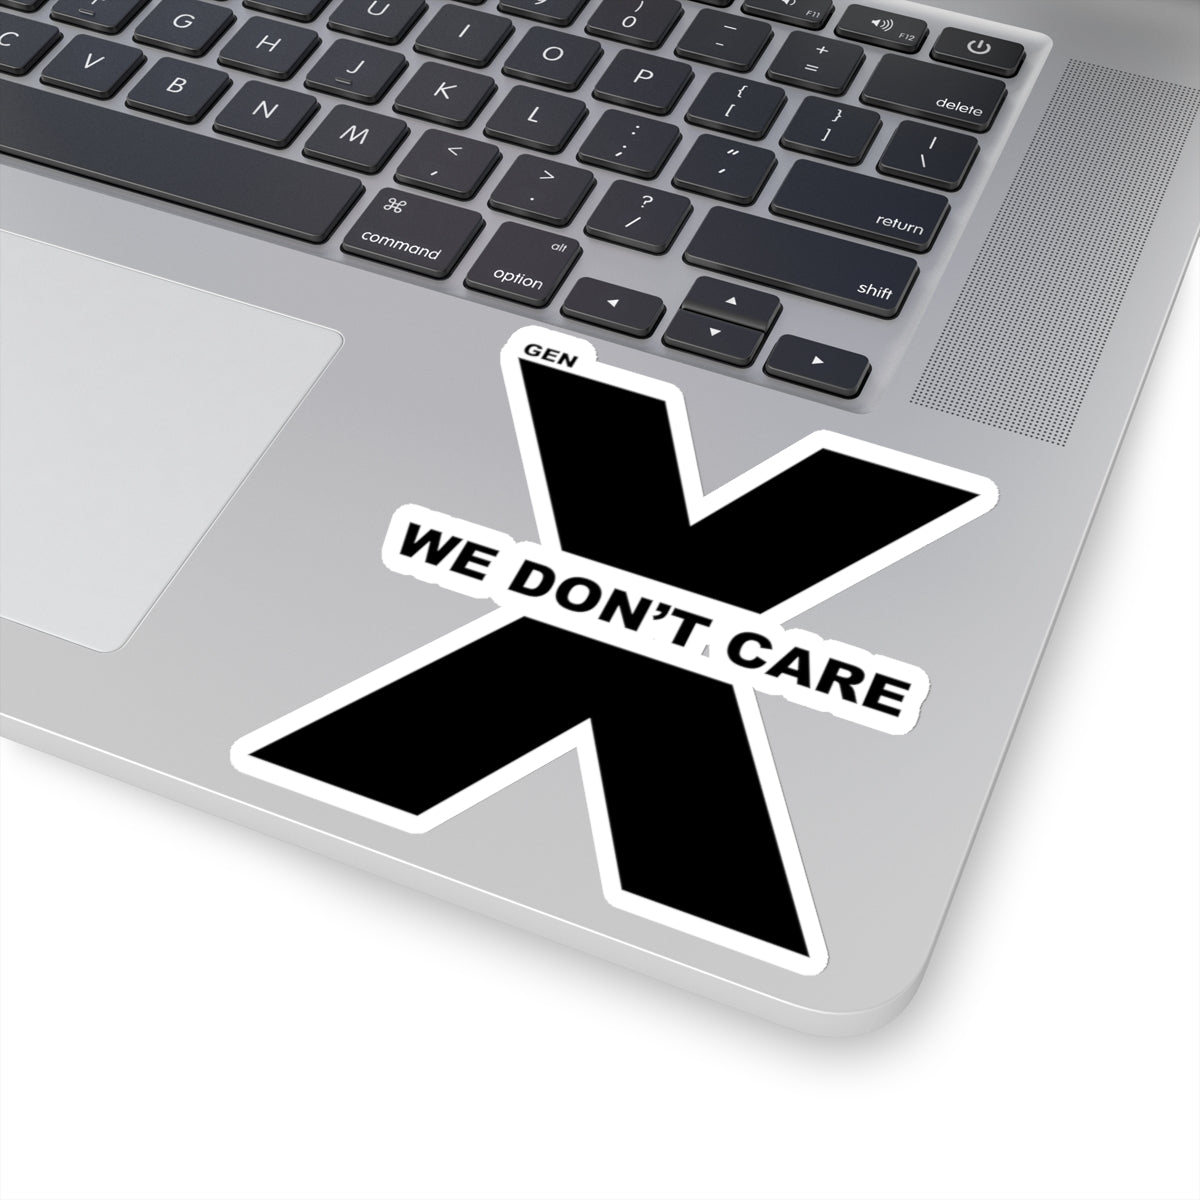 Gen X -We Don't Care -4x4" Sticker By Generation Mood